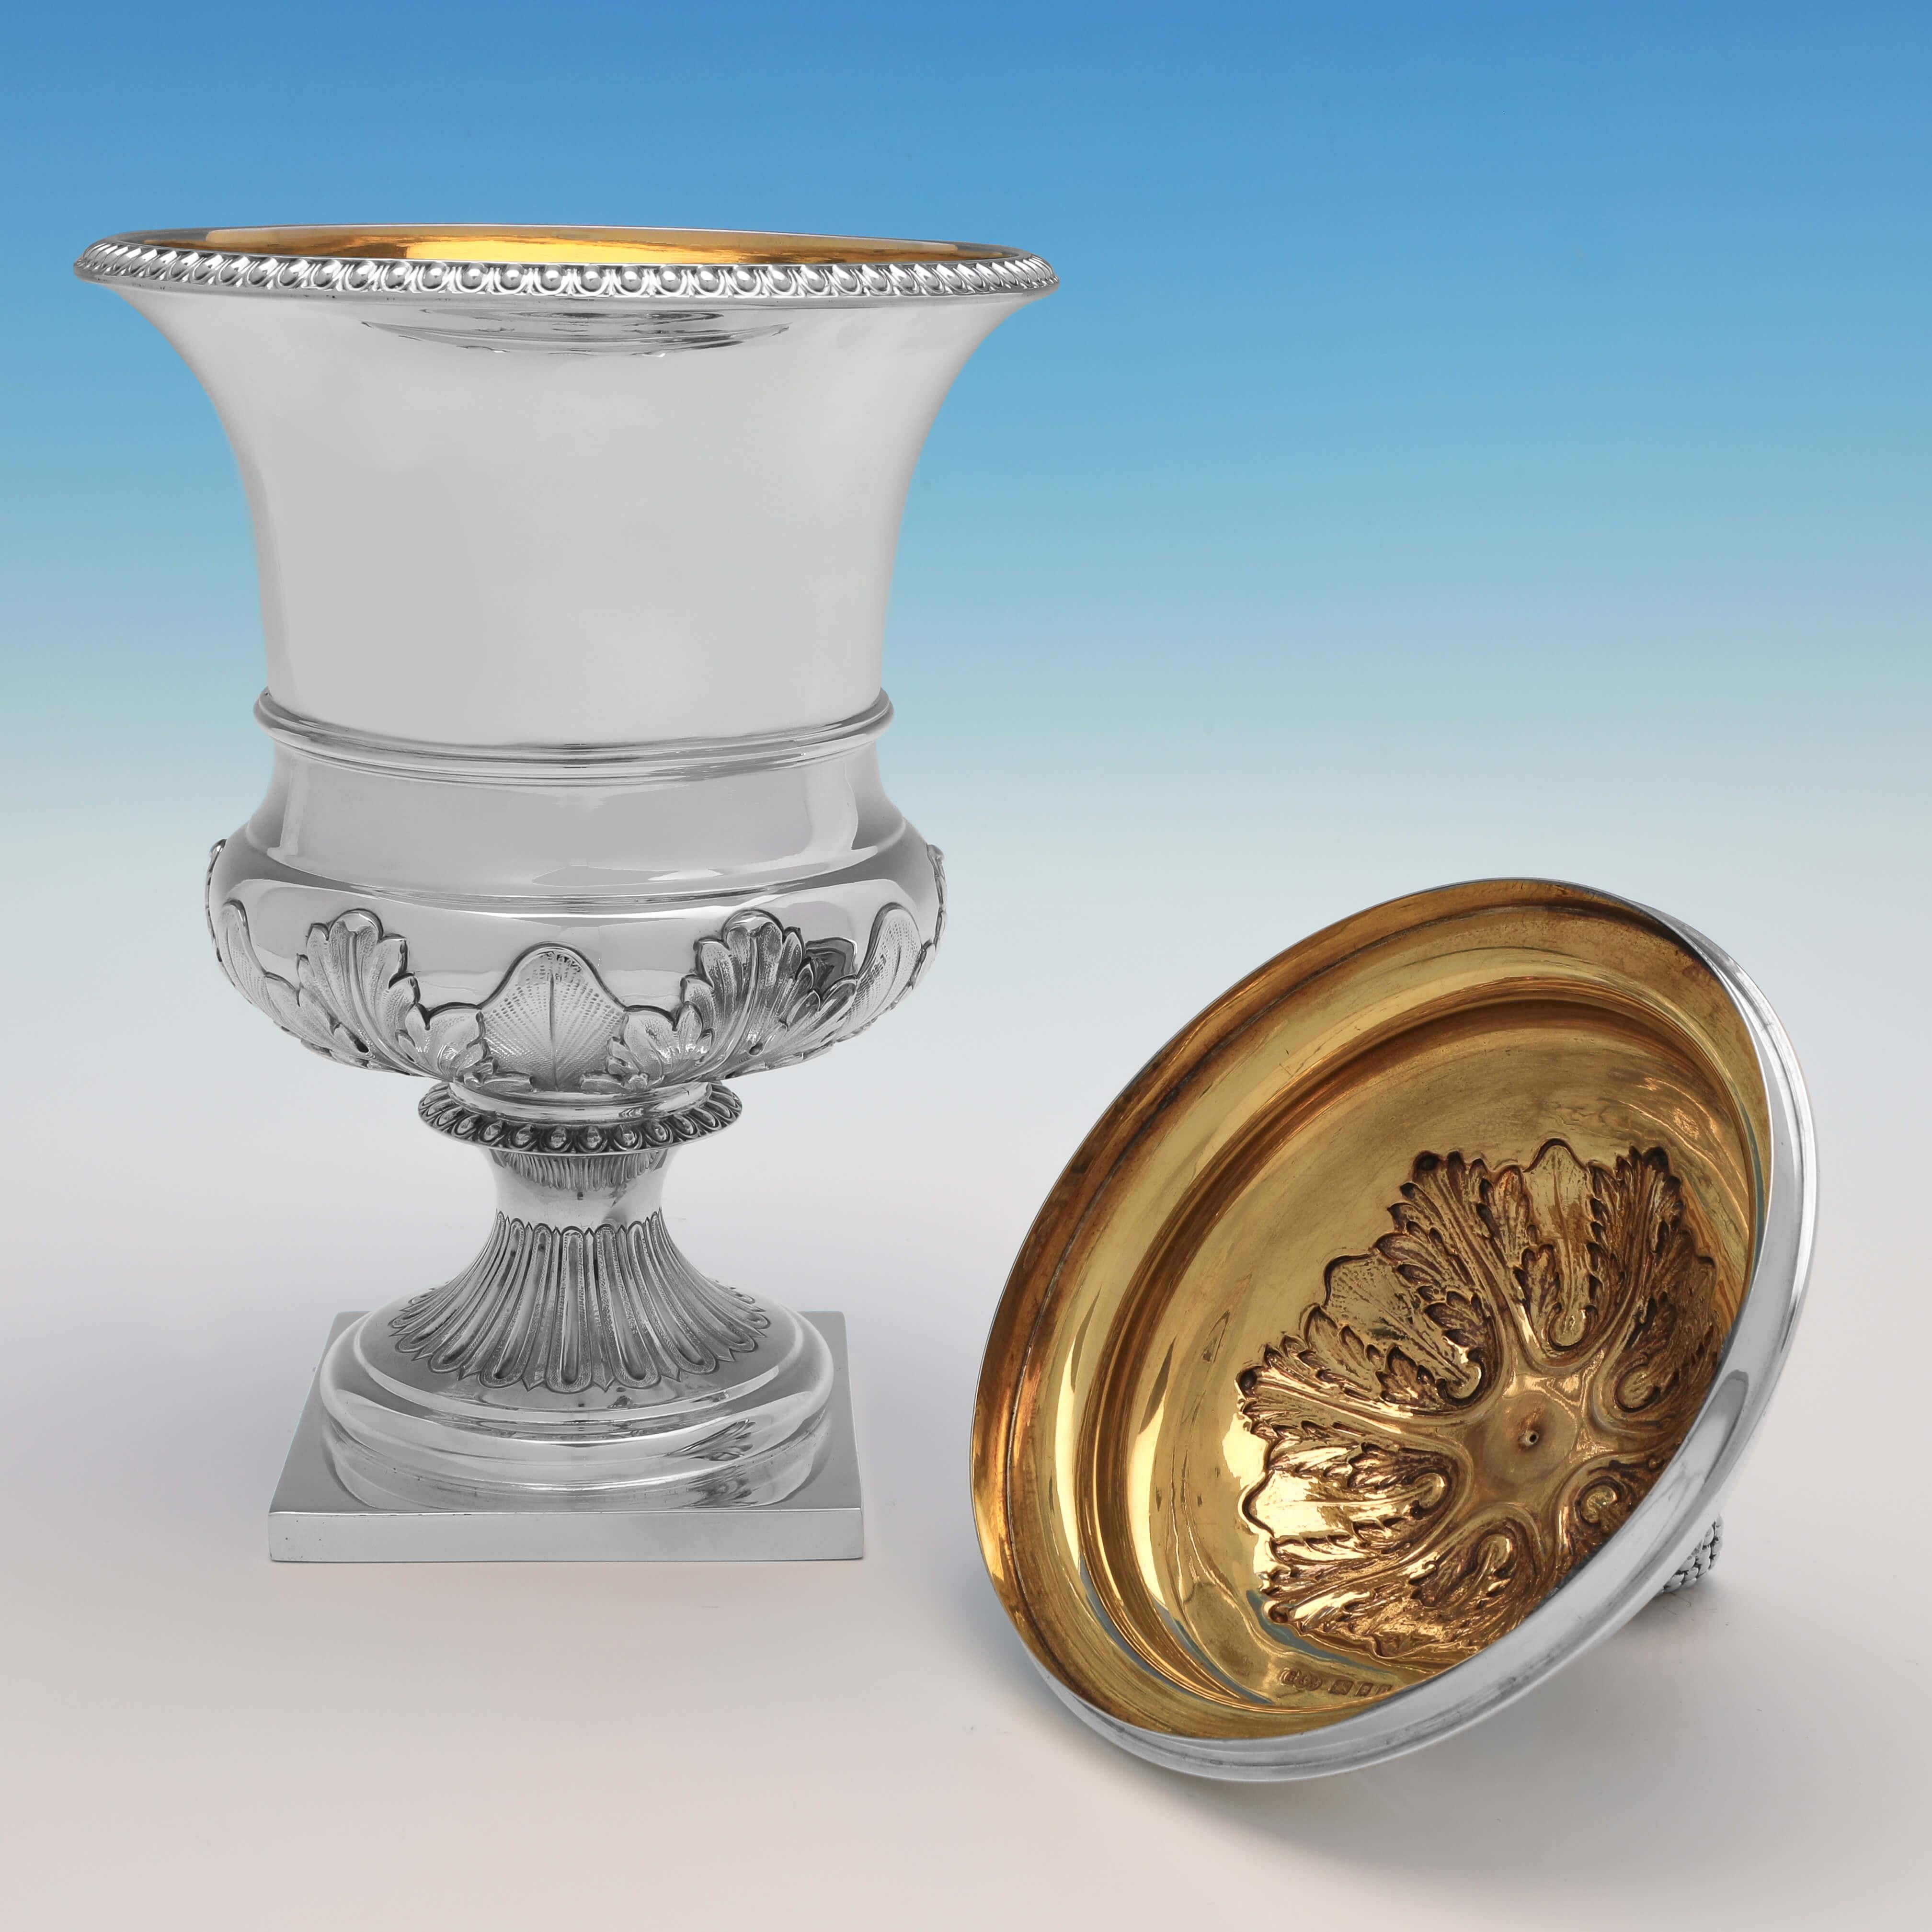 Regency Revival Stunning Sterling Silver Urn or Cup & Cover - London 1928 For Sale